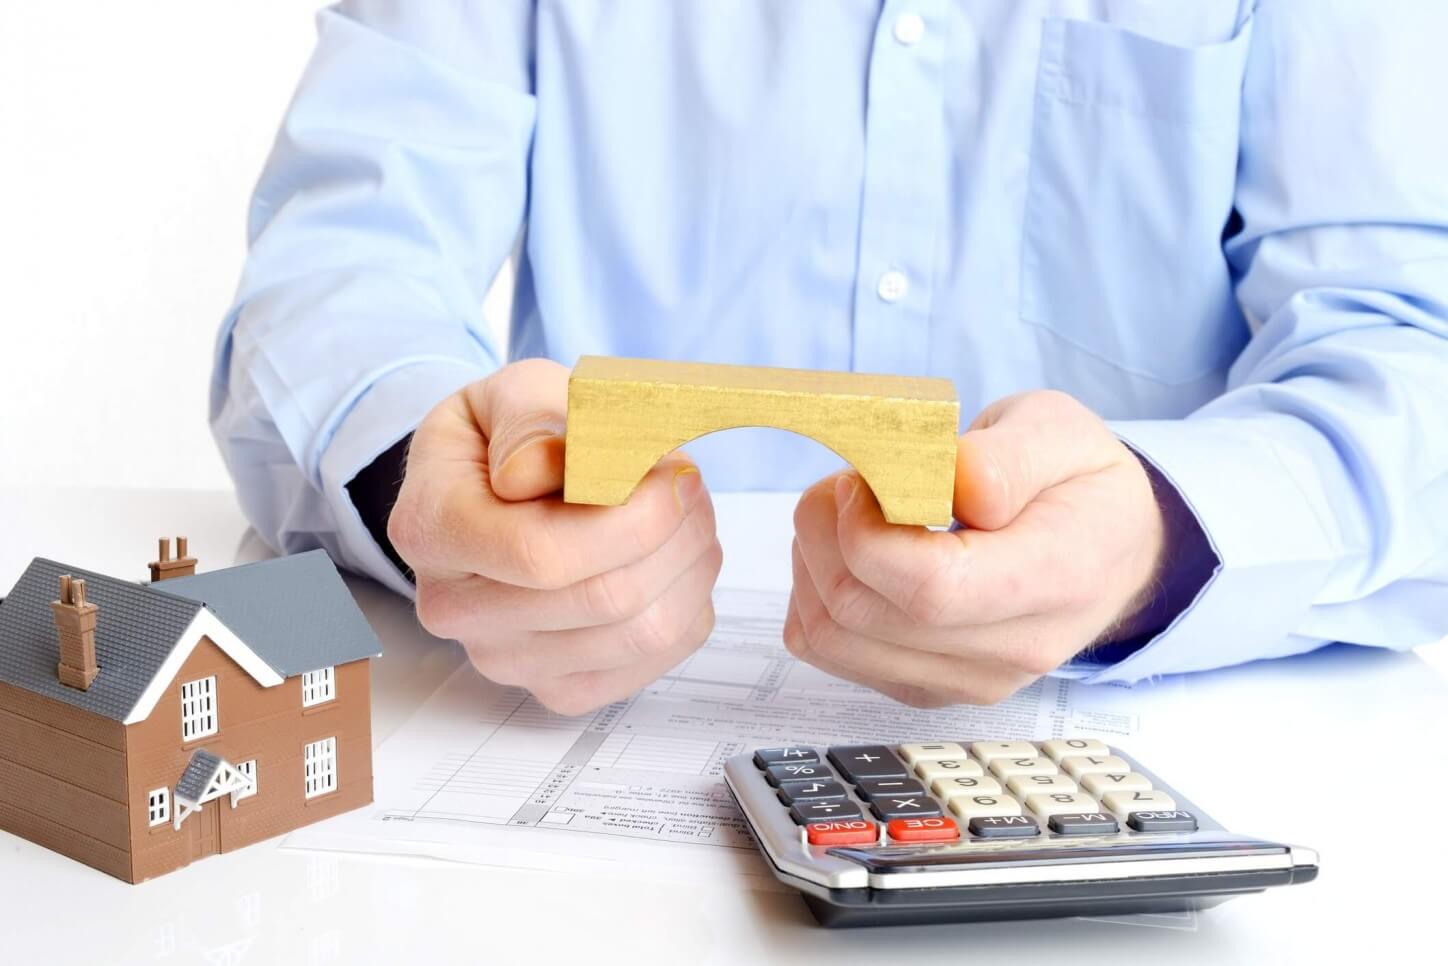 Bridge Financing with Bad Credit: How to Buy a House Before Yours Sells